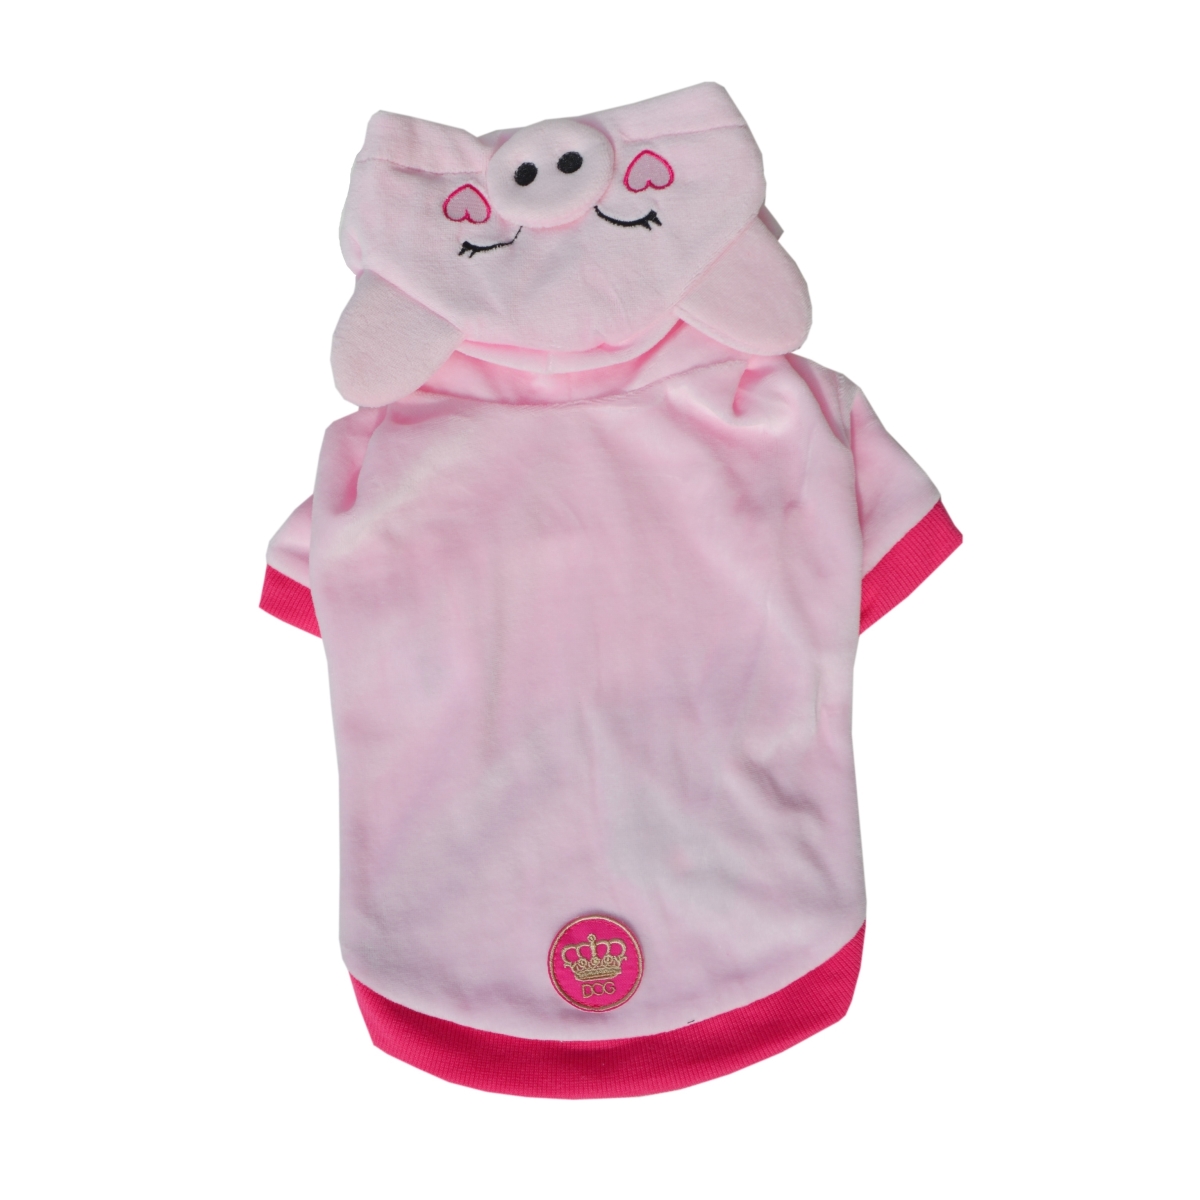 Fw355-xs Pig Hoodie, Pink - Extra Small